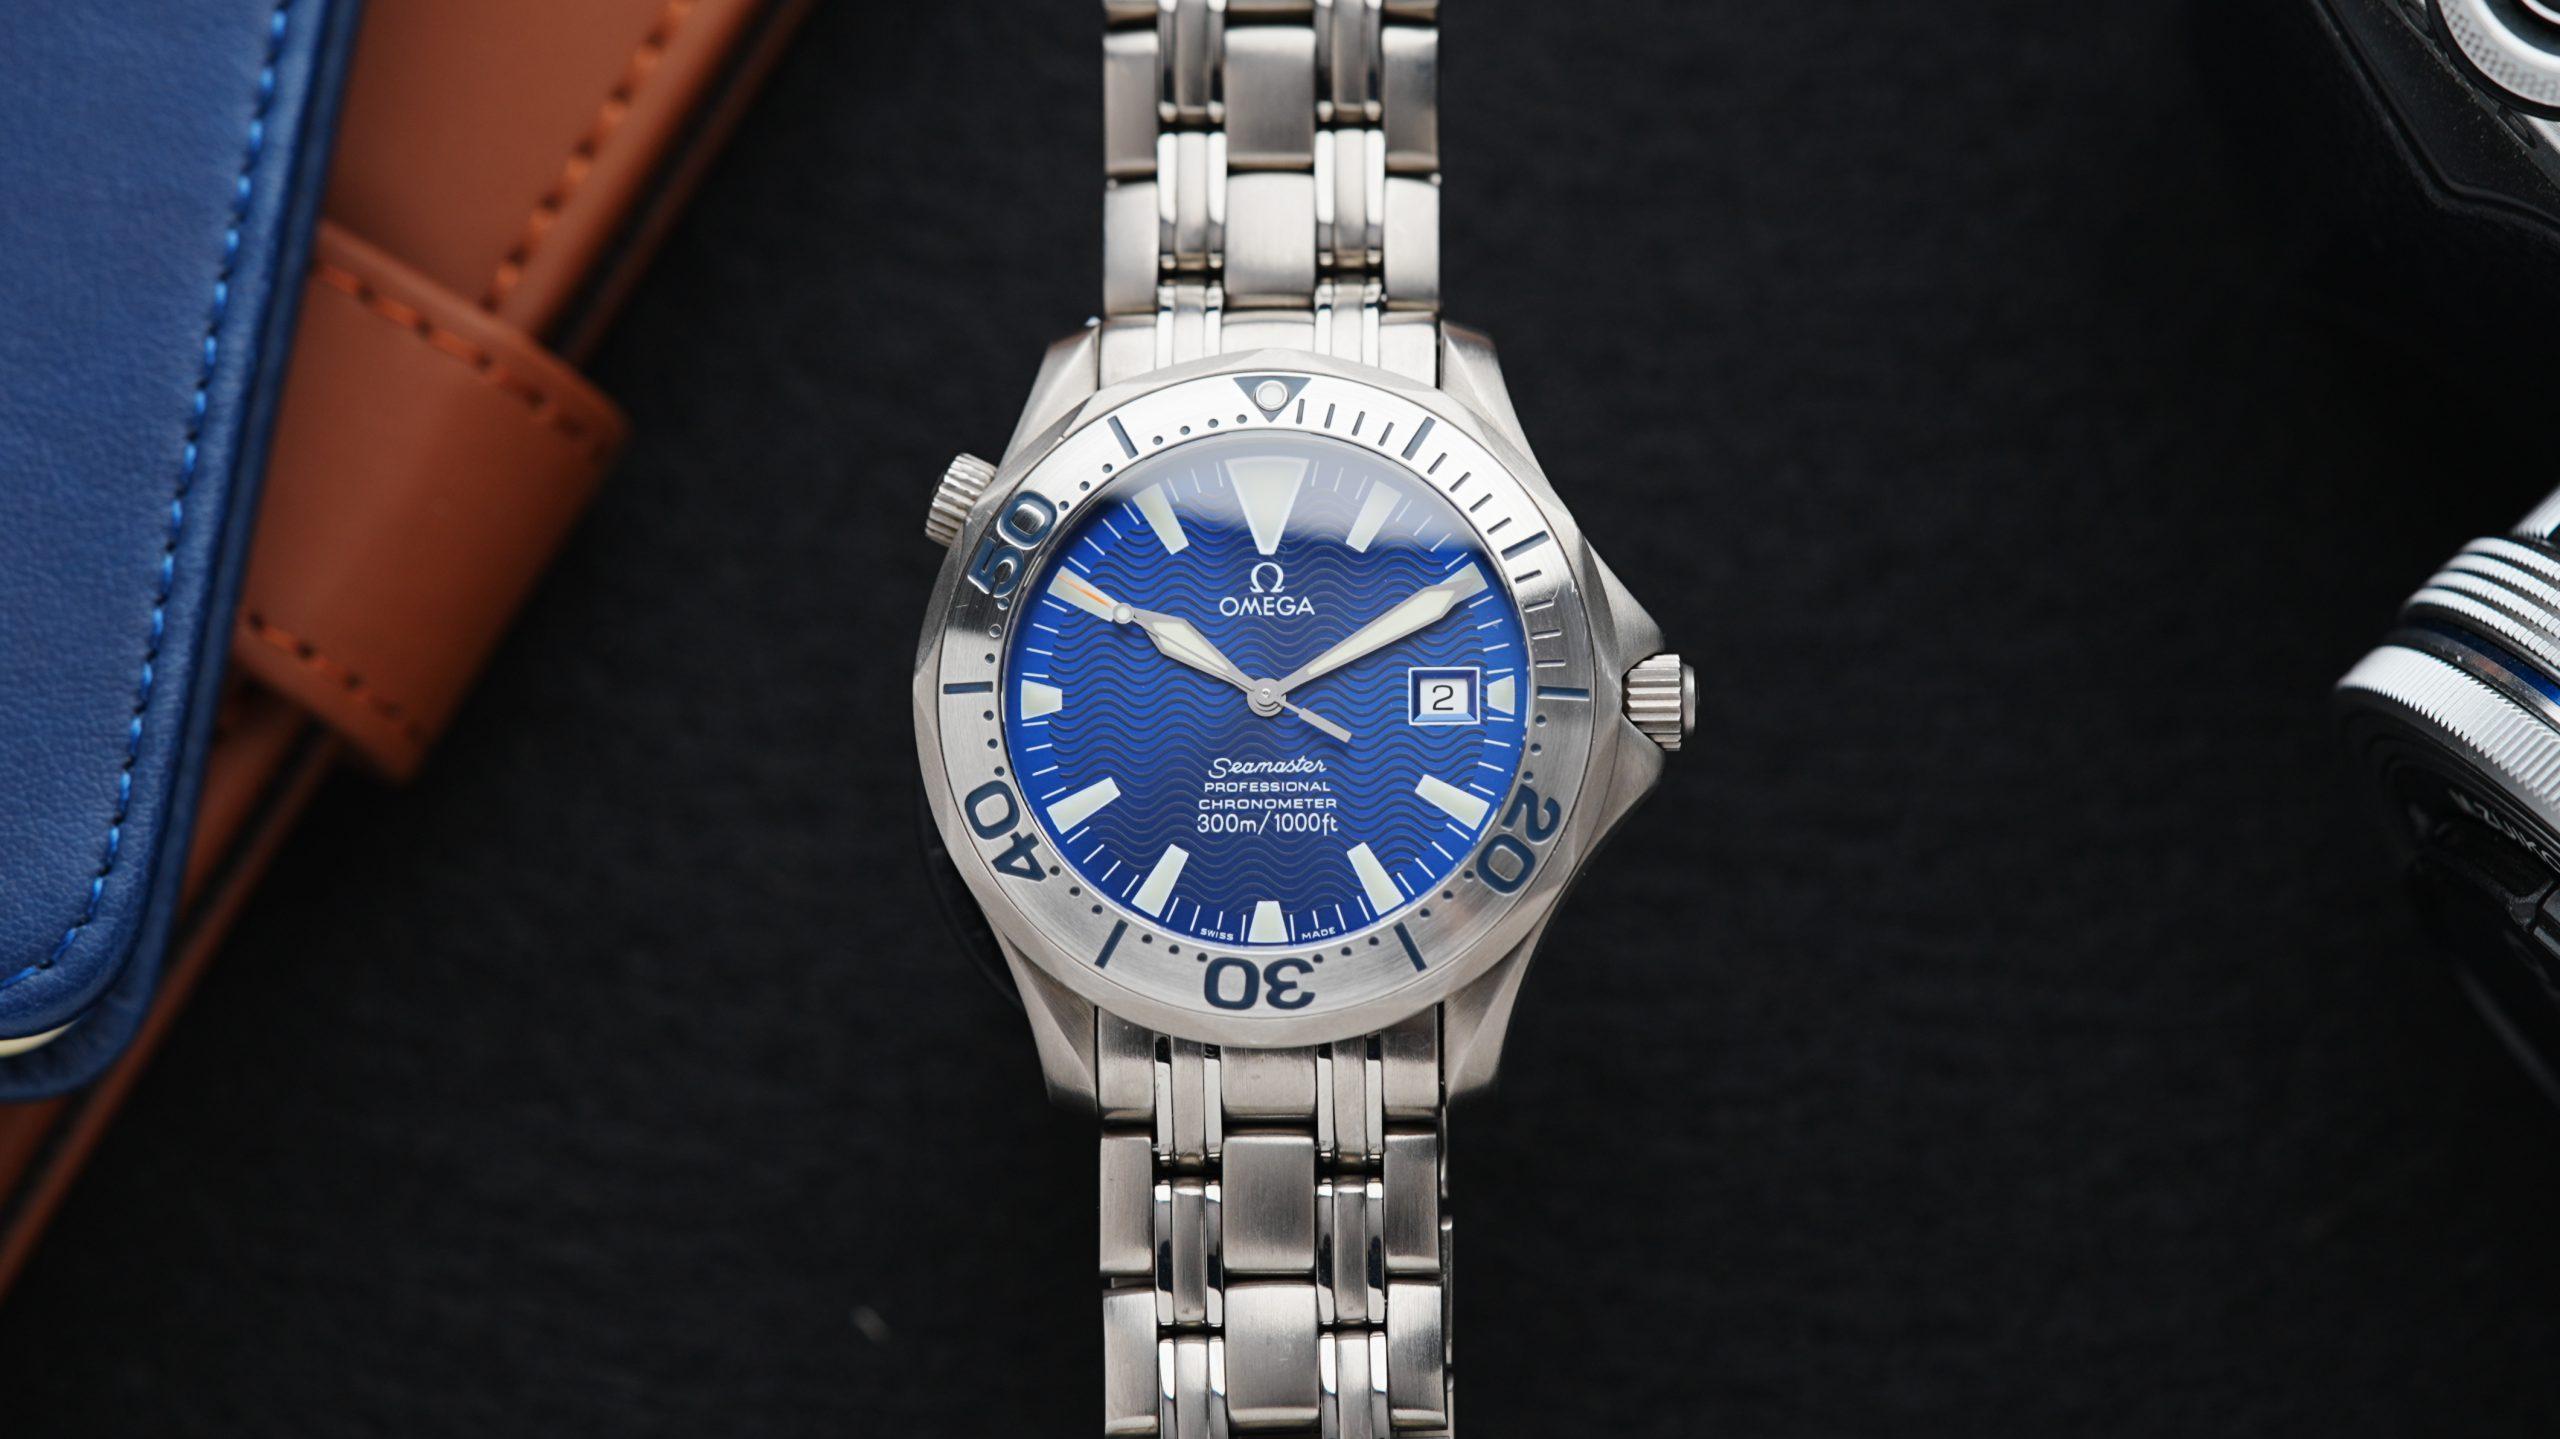 Omega Seamaster Professional 300m Electric Blue with Sword Hands watch featured under white lighting.